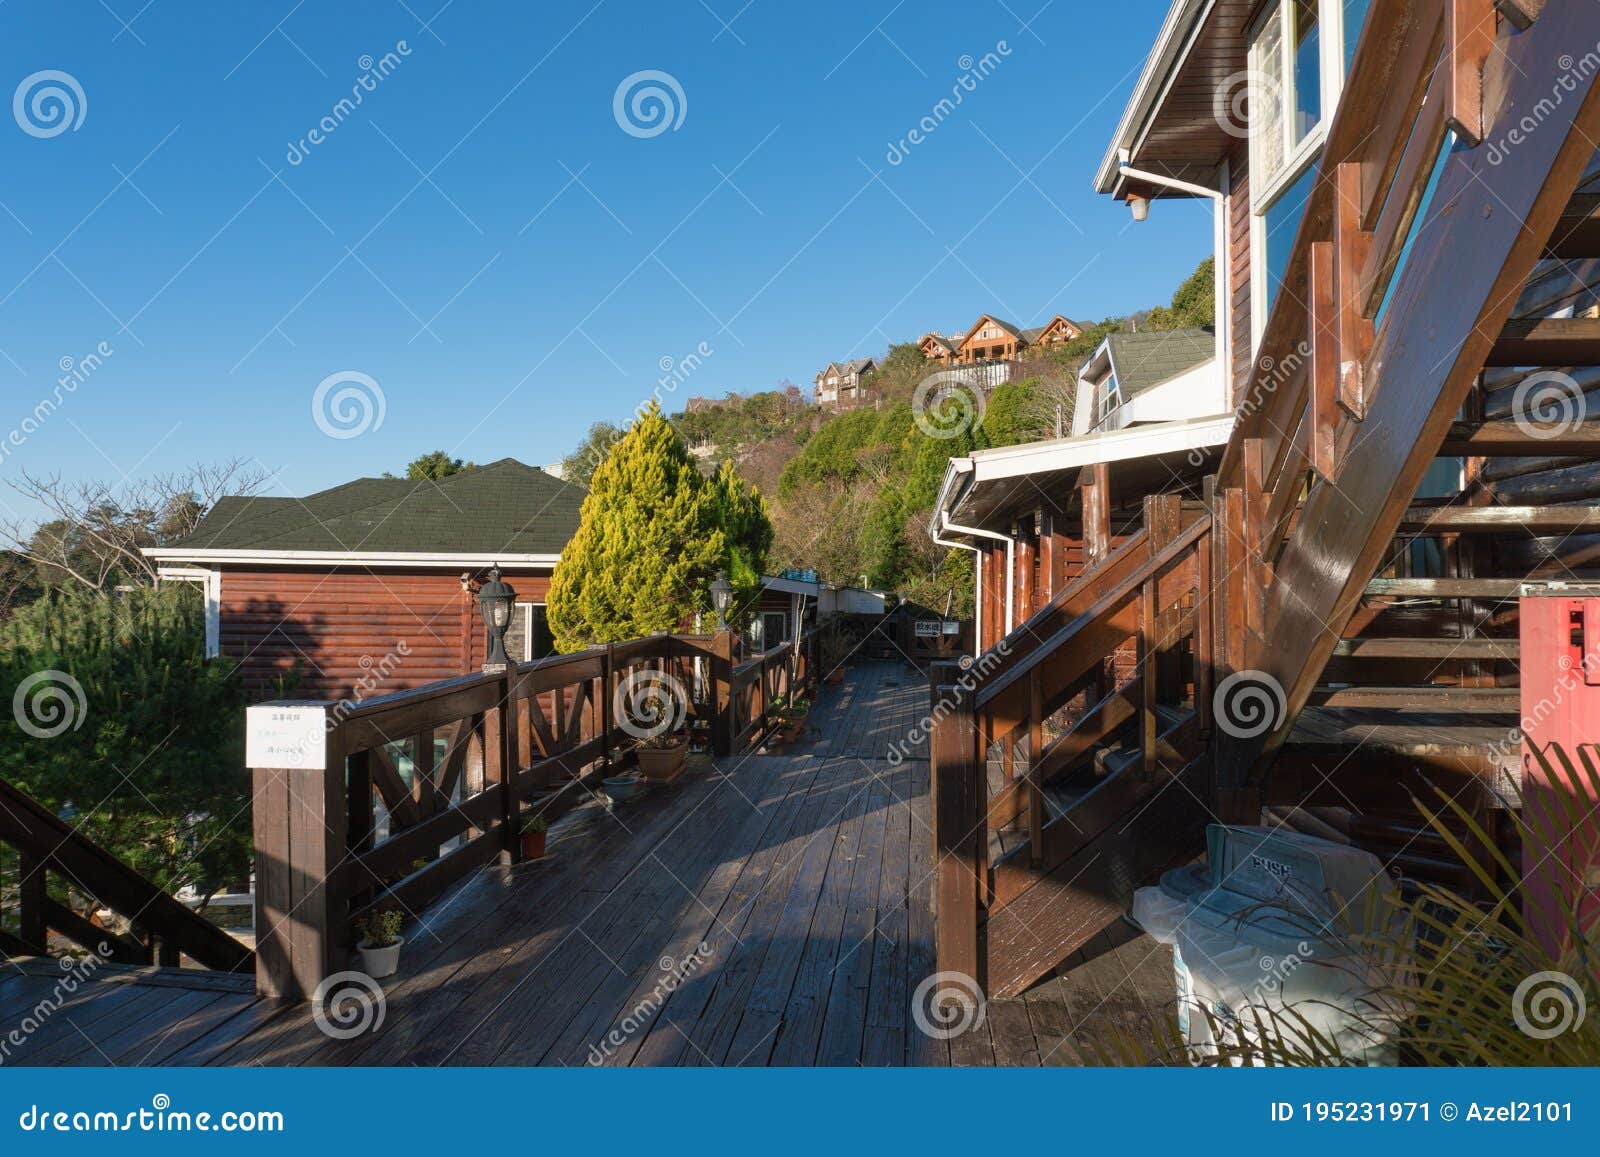 Terrace View Of Yosemite Park Bed And Breakfast Stock Image Image Of Landscape Food